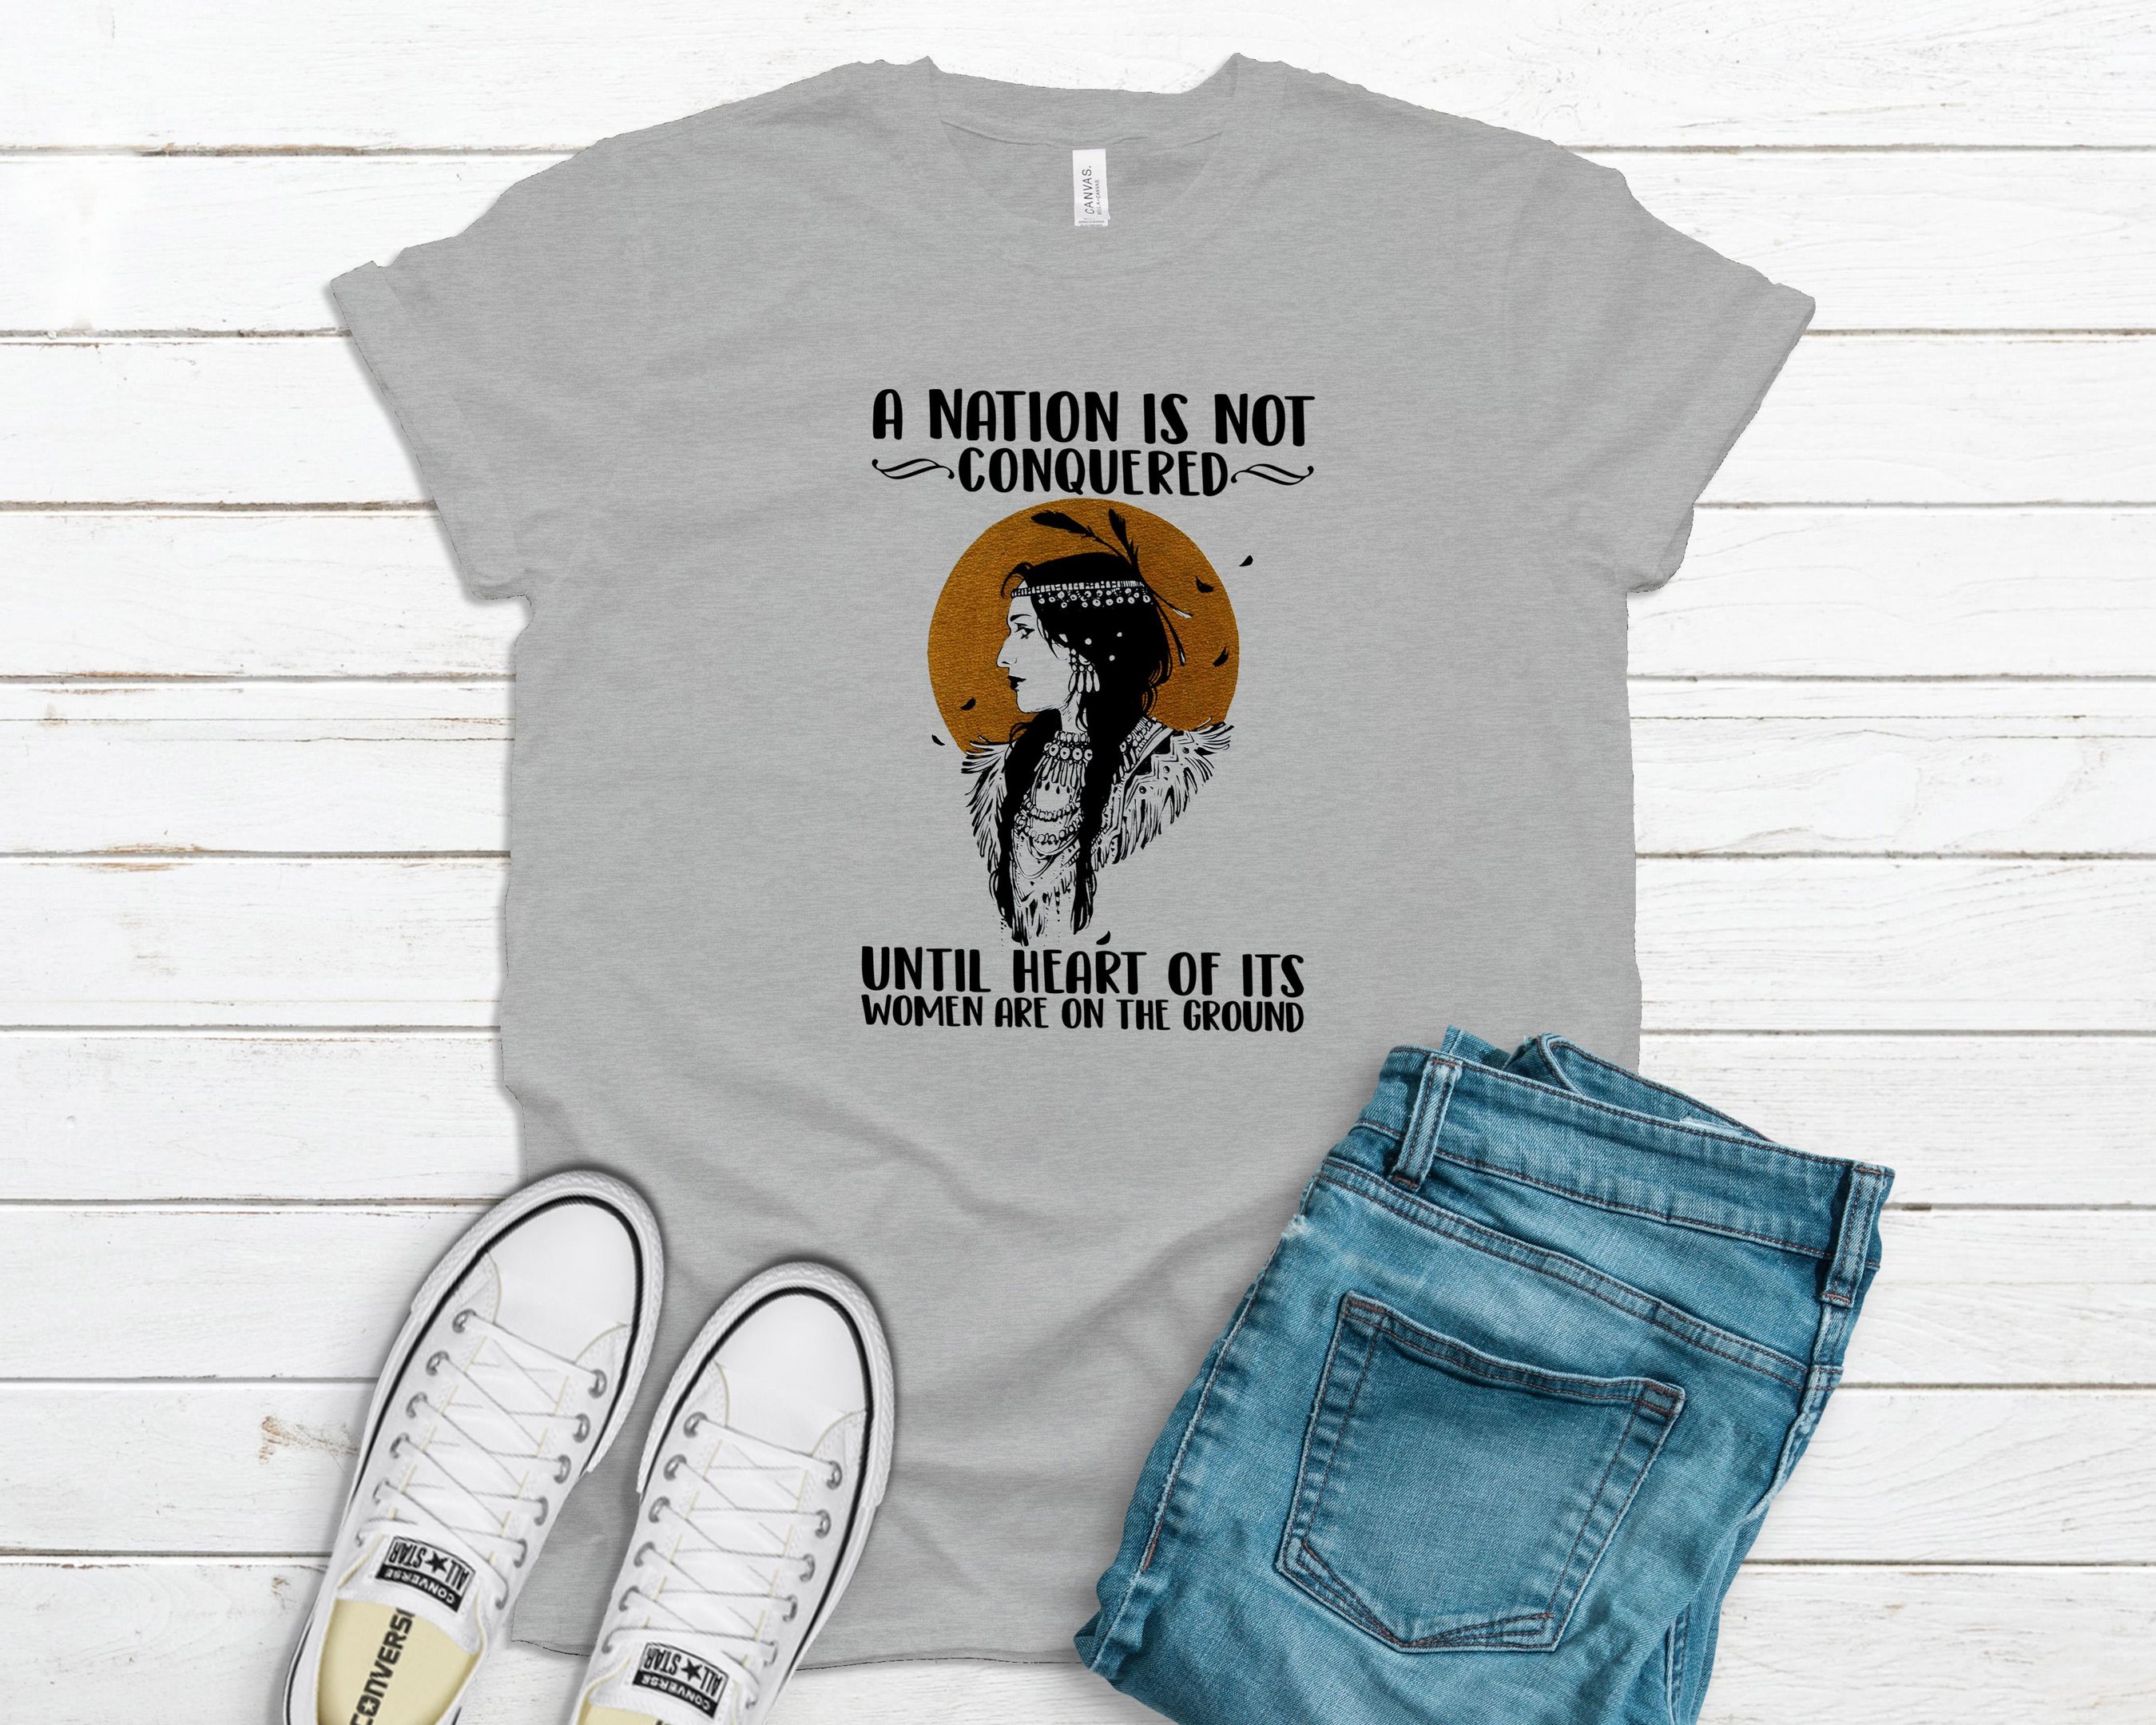 A Nation Is Not Conquered Shirt, Native Woman Shirt, Ndn Shirt, Native Pride Shirt